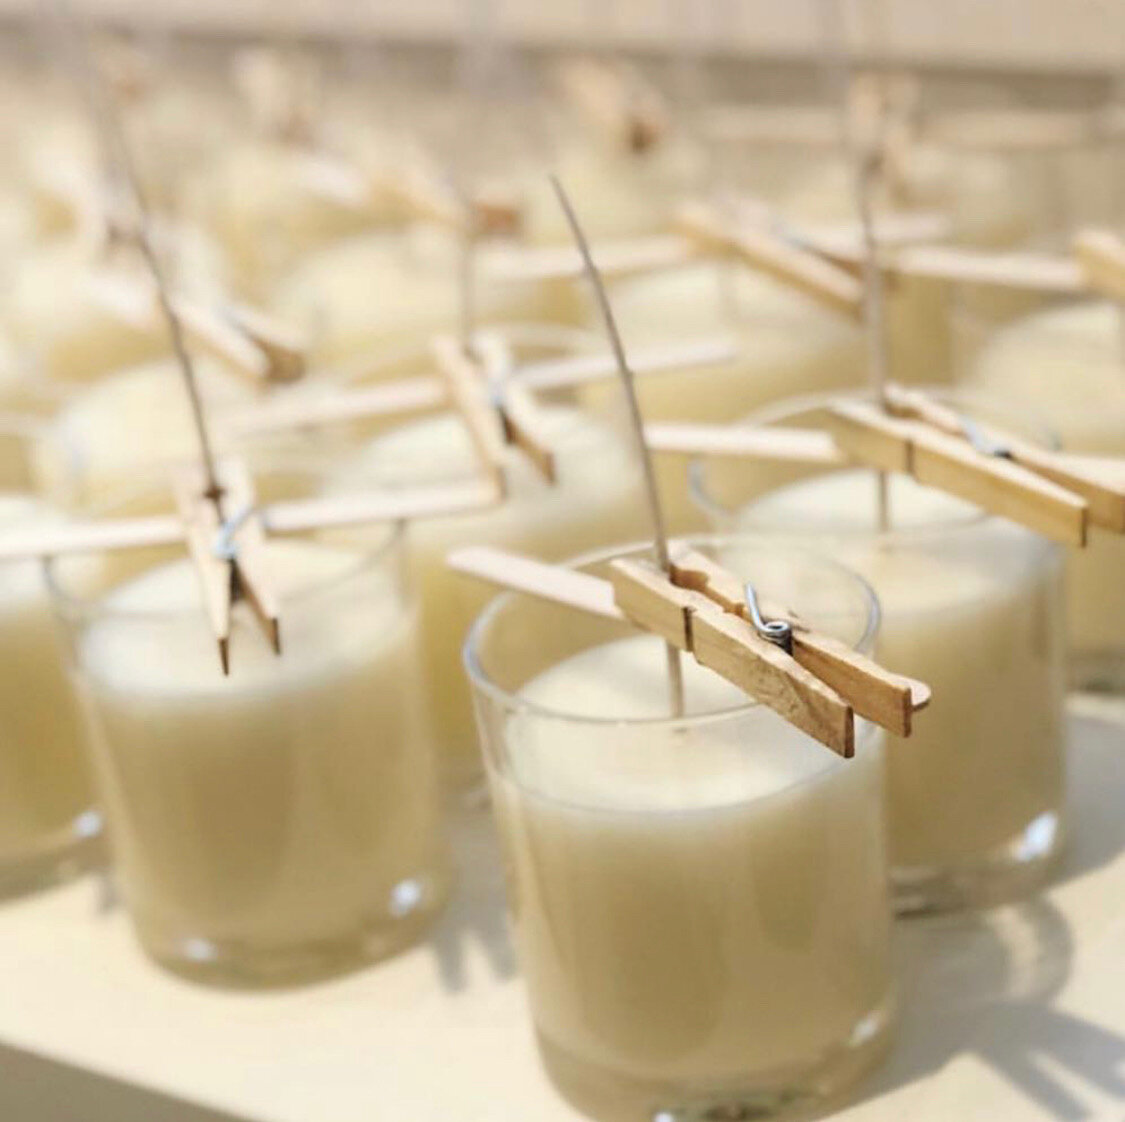 First hand experience creating great soy wax candles in clear glass jars